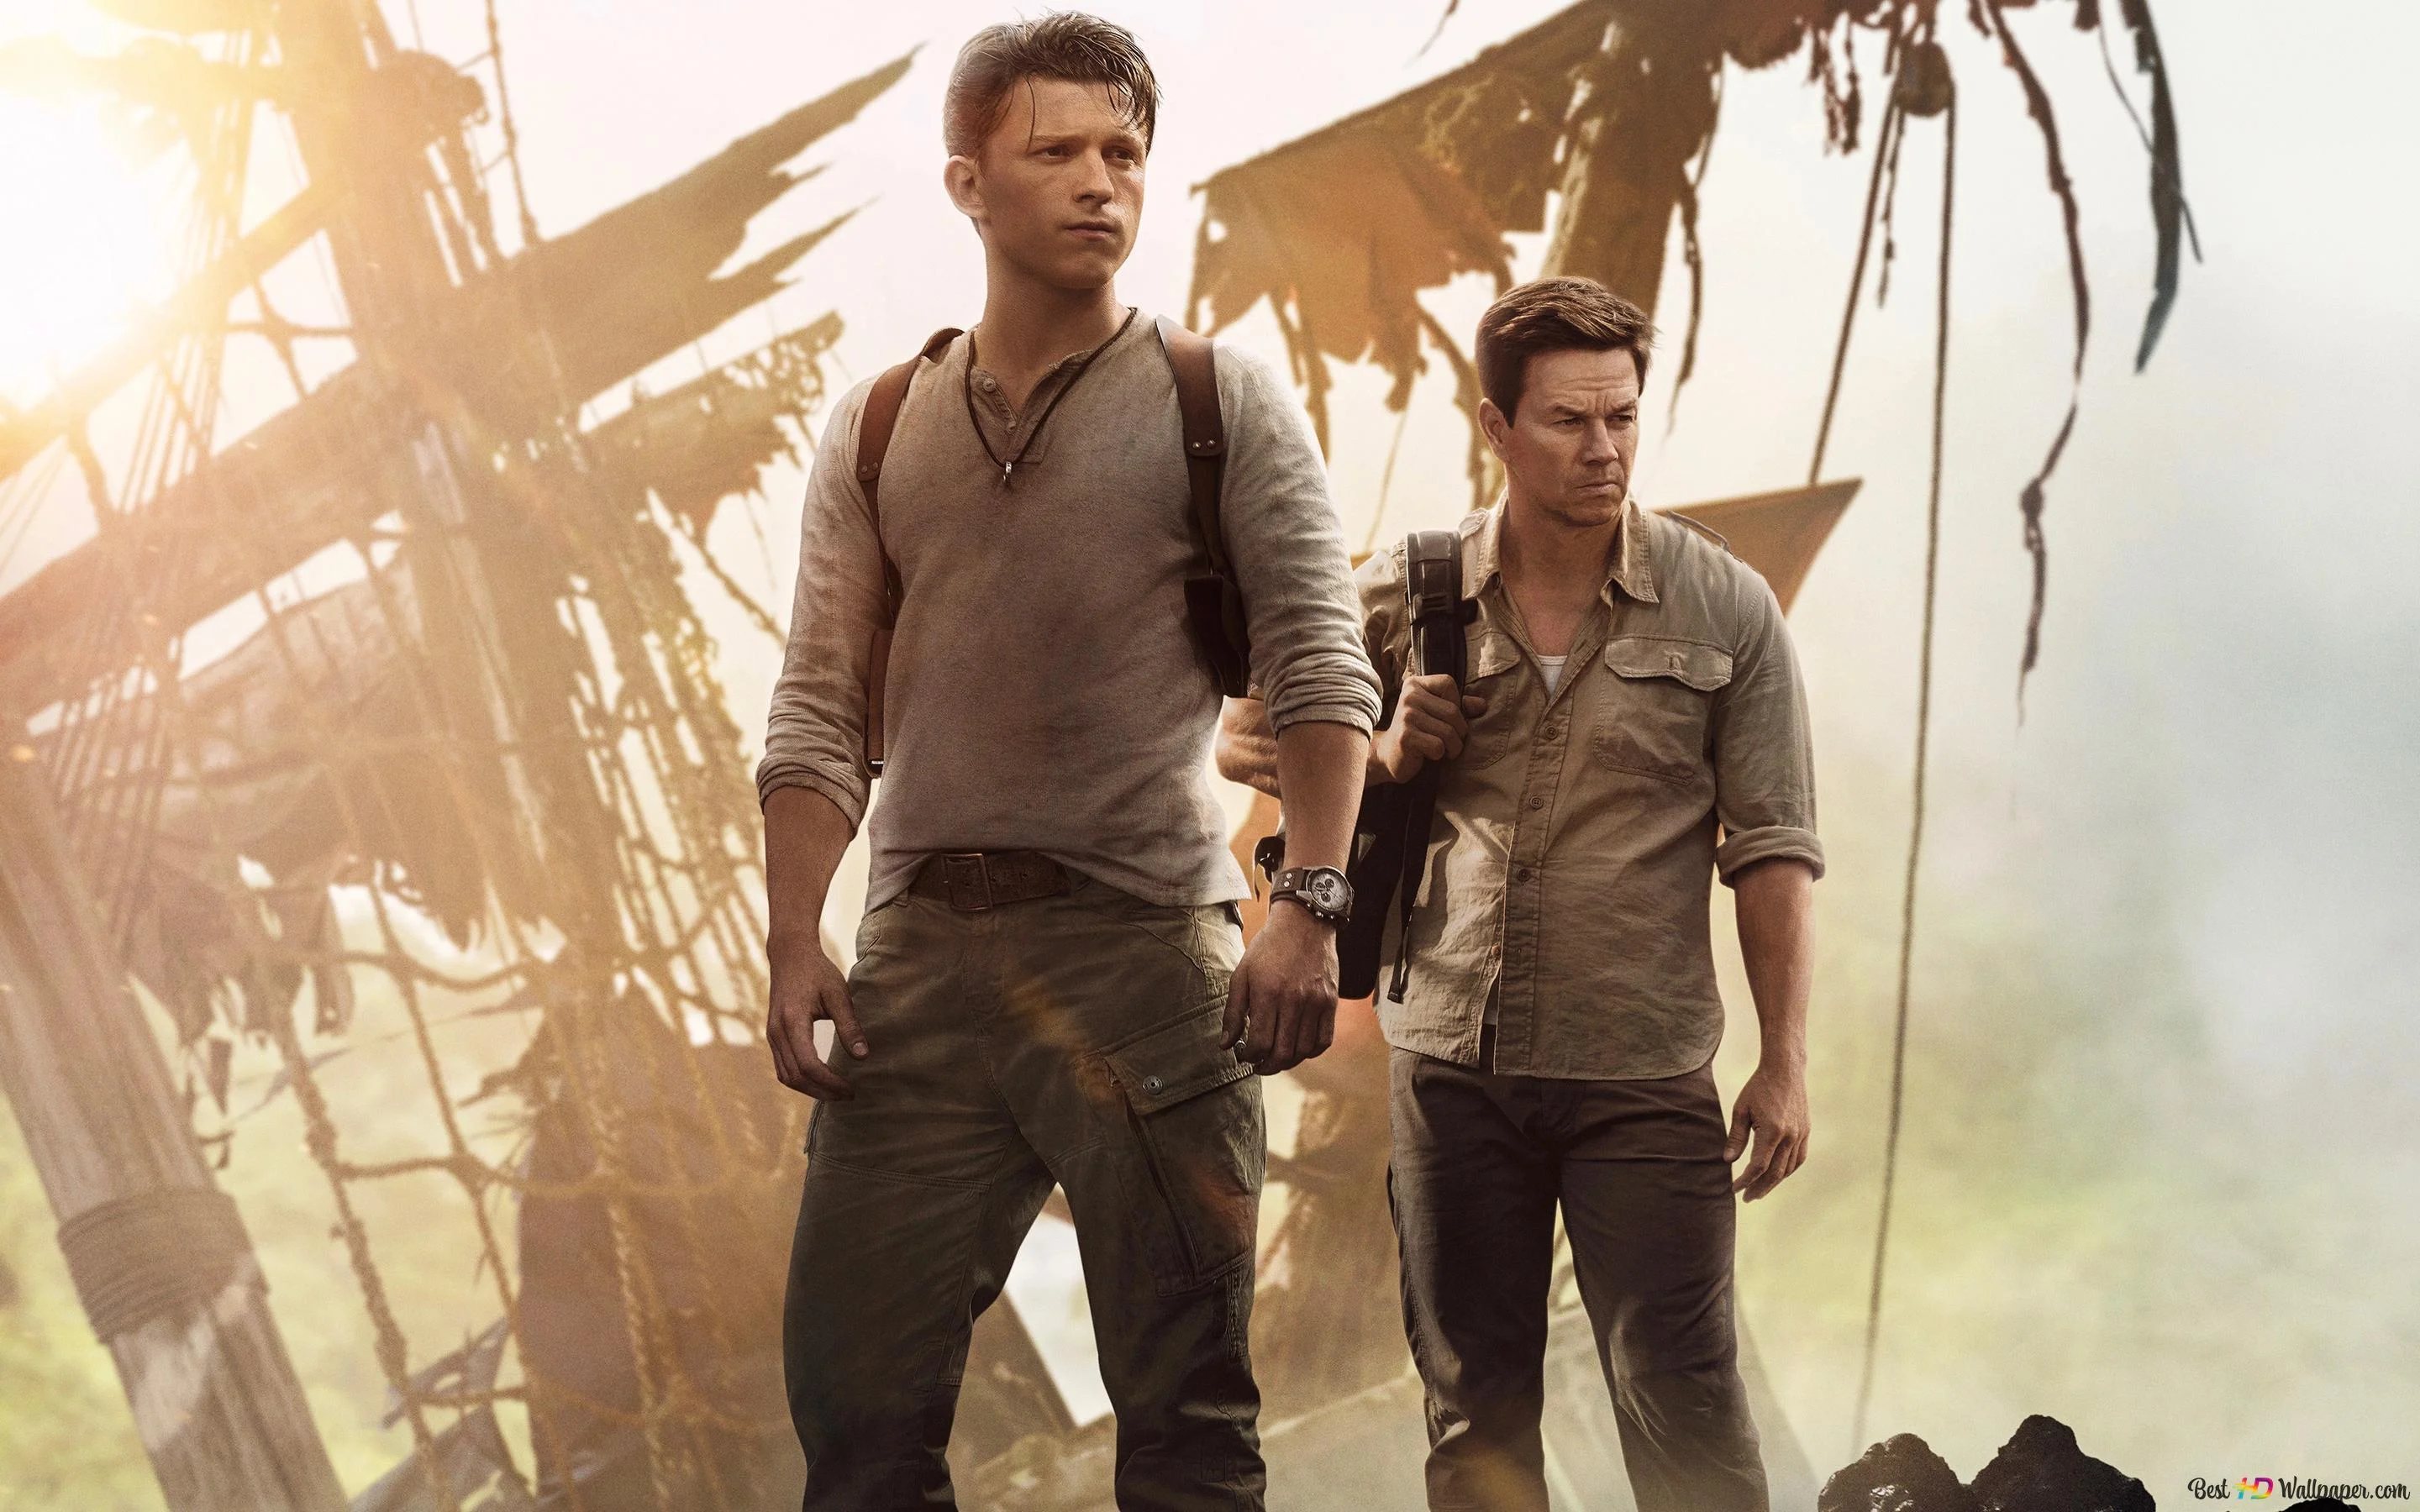 A sequel to the Uncharted film adaptation is in development. The first version of the script is already ready